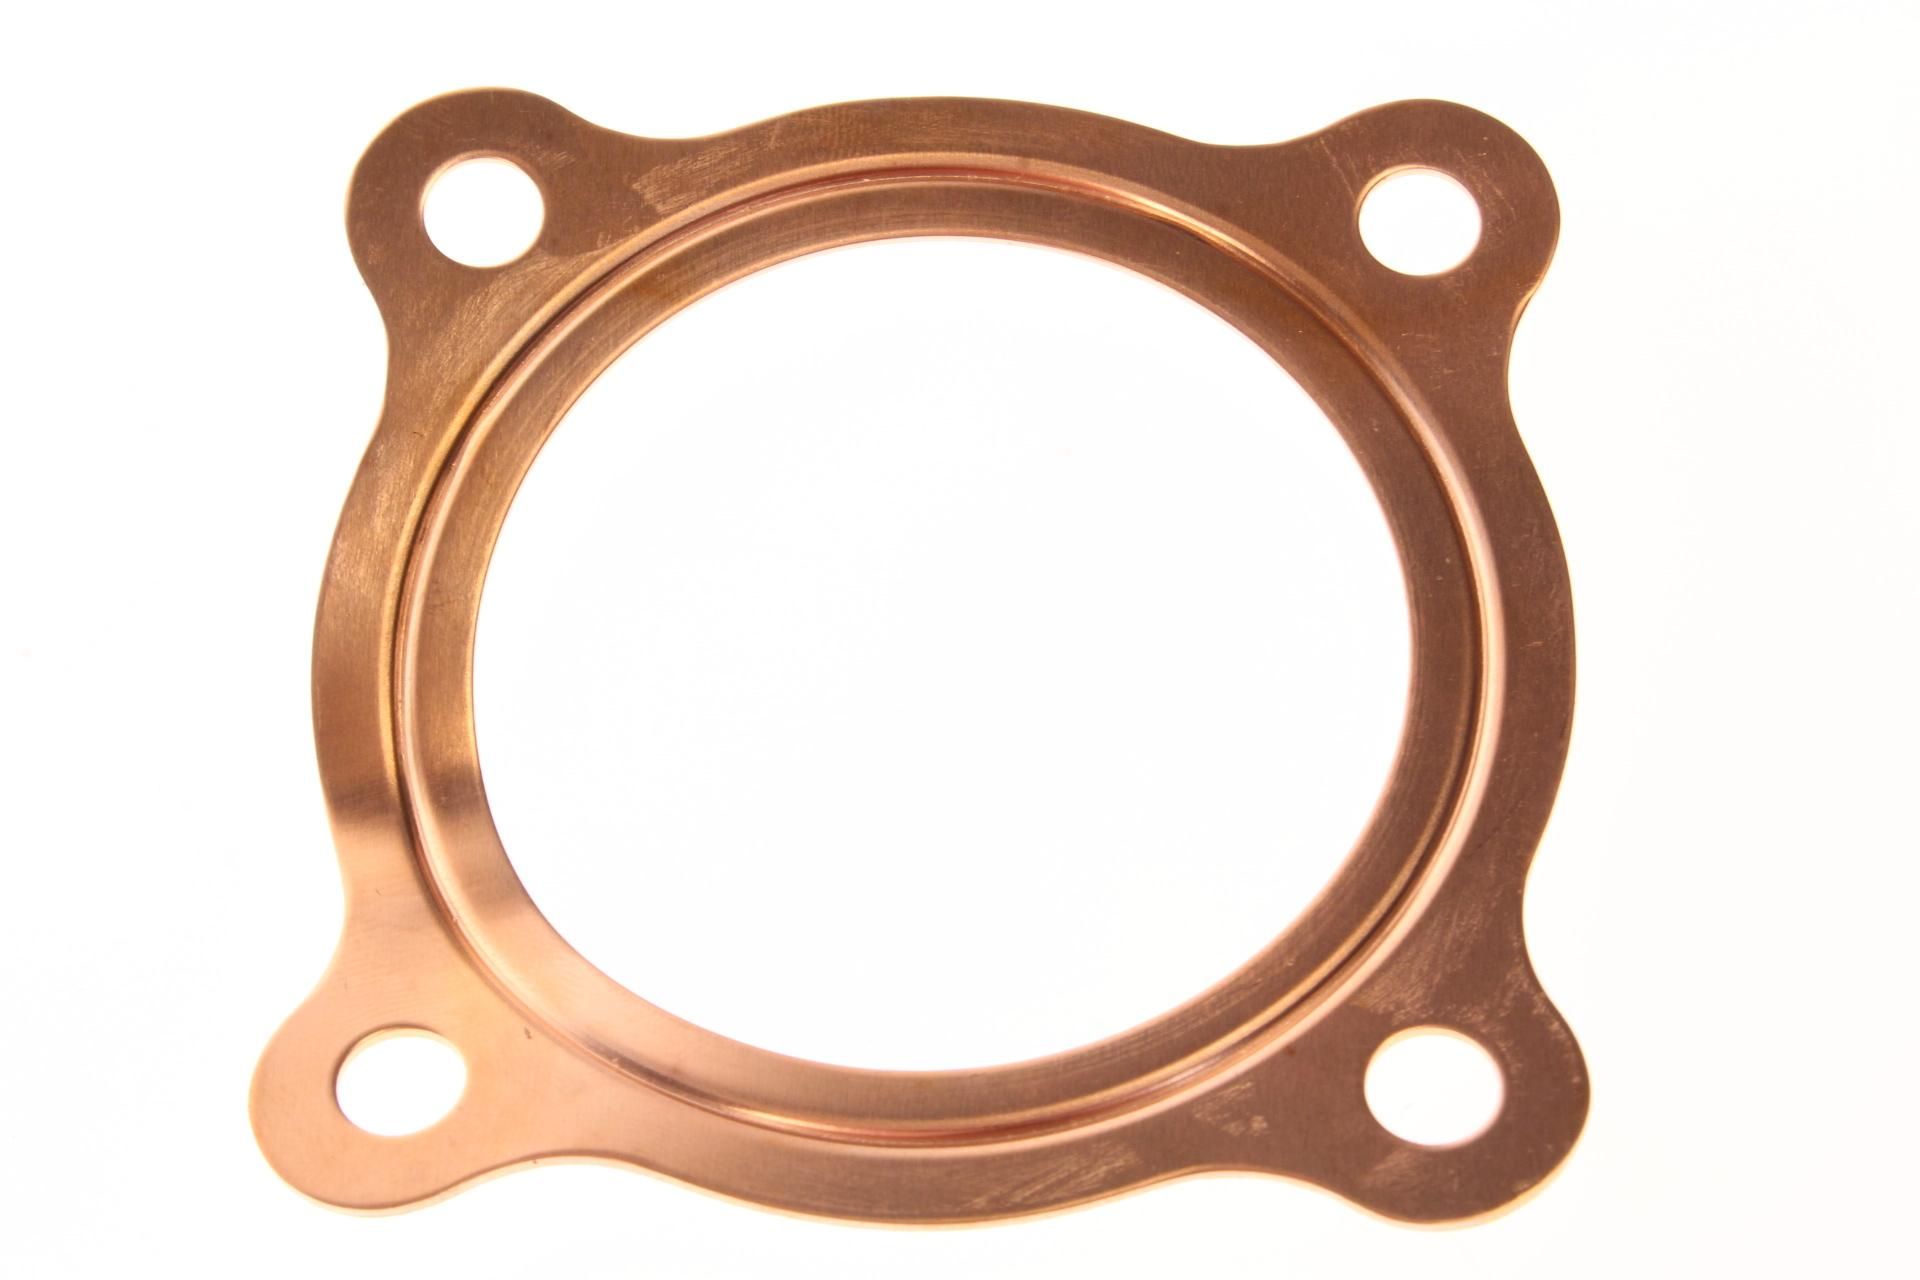 3J8-11181-00-00 Superseded by 2F4-11181-00-00 - GASKET,CYL HEAD 1